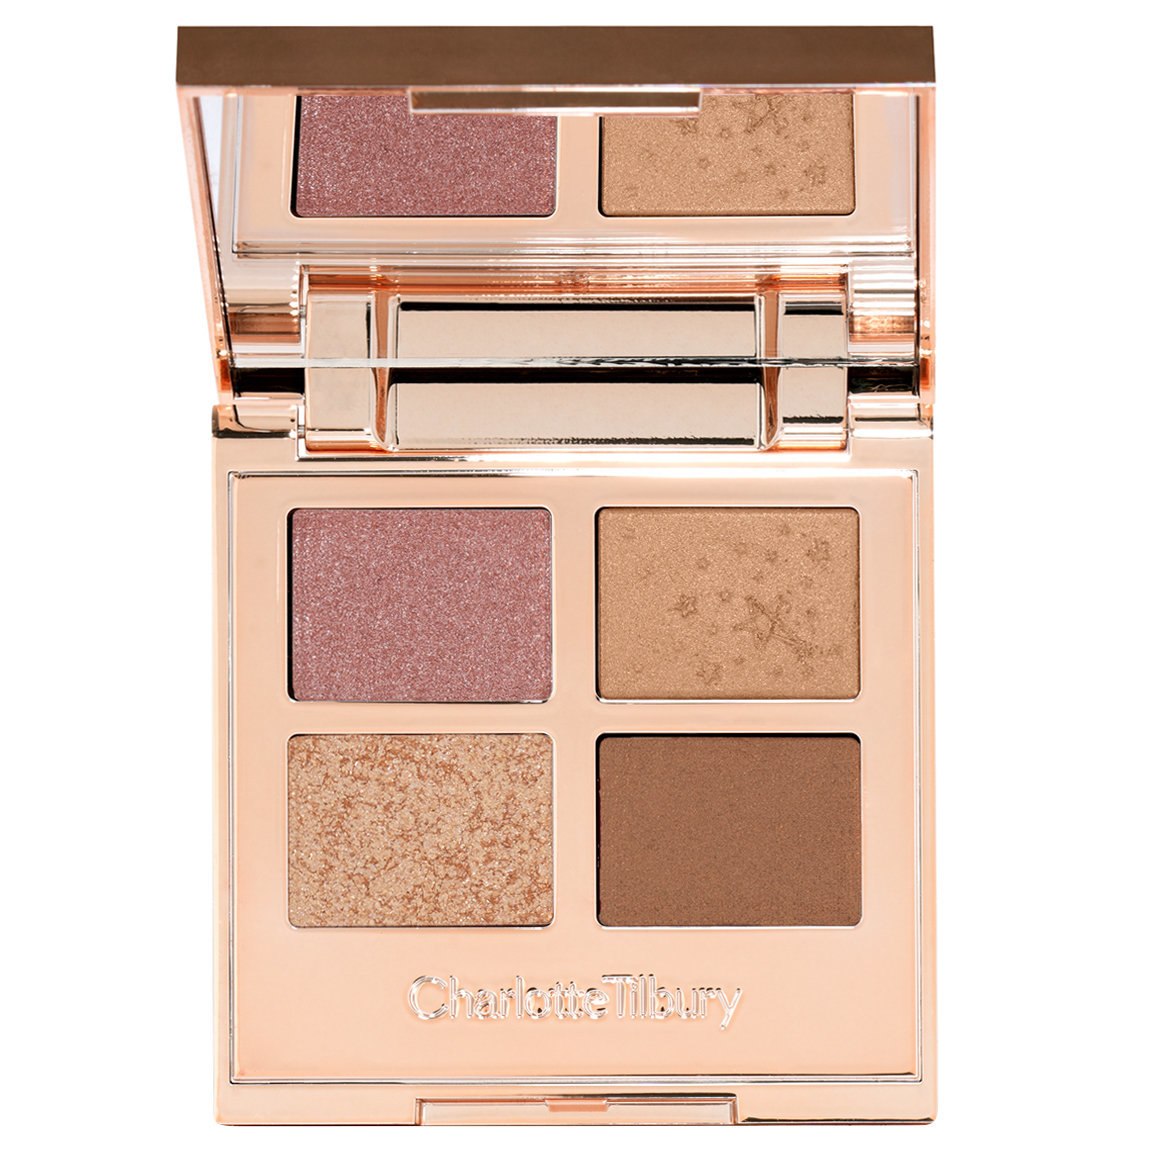 Charlotte Tilbury Luxury Palette of Pearls alternative view 1 - product swatch.